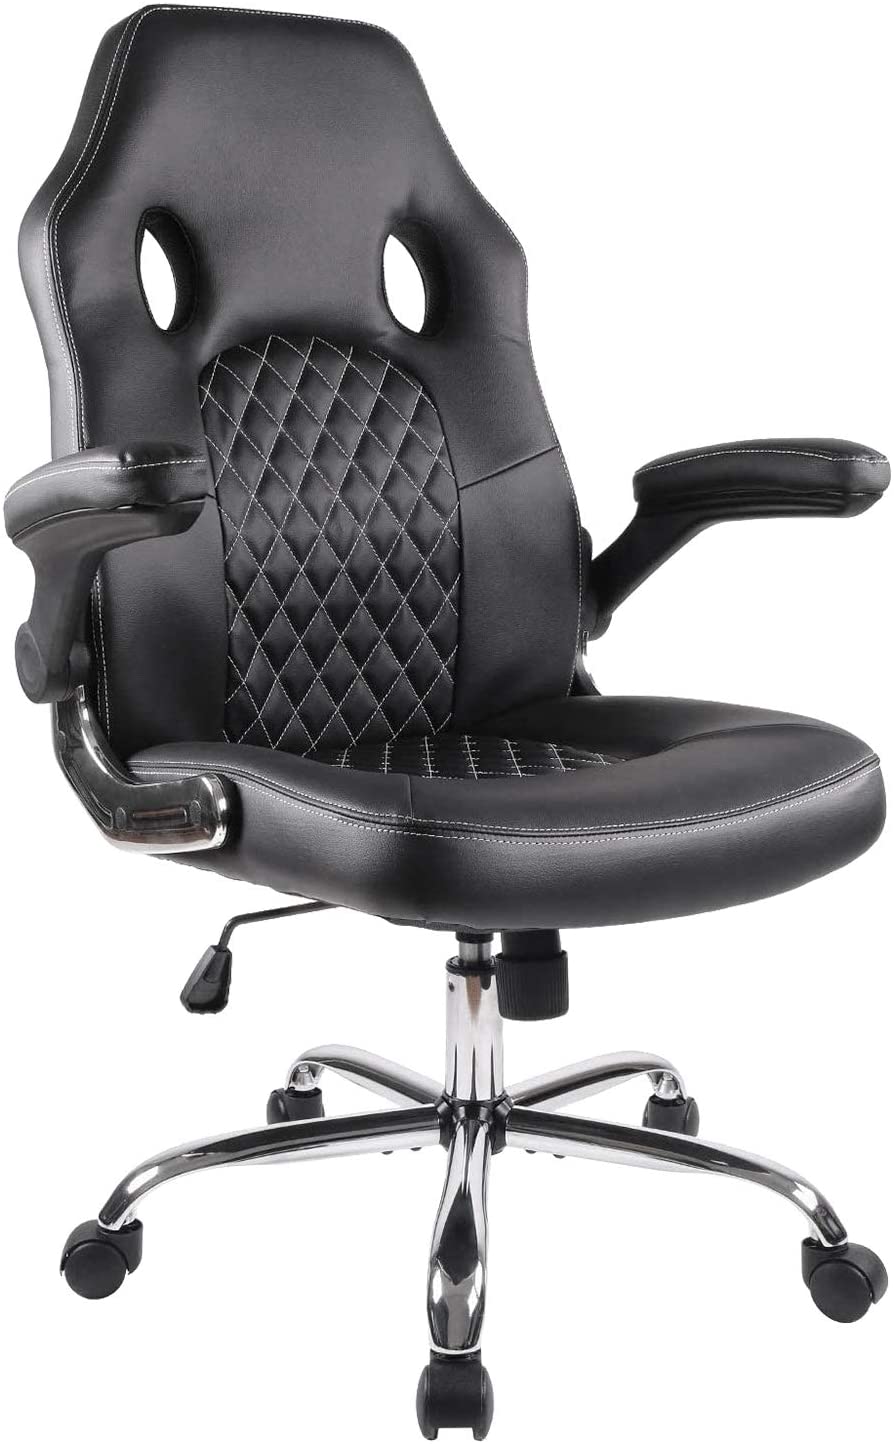 Executive Leather Office / Gaming Chair